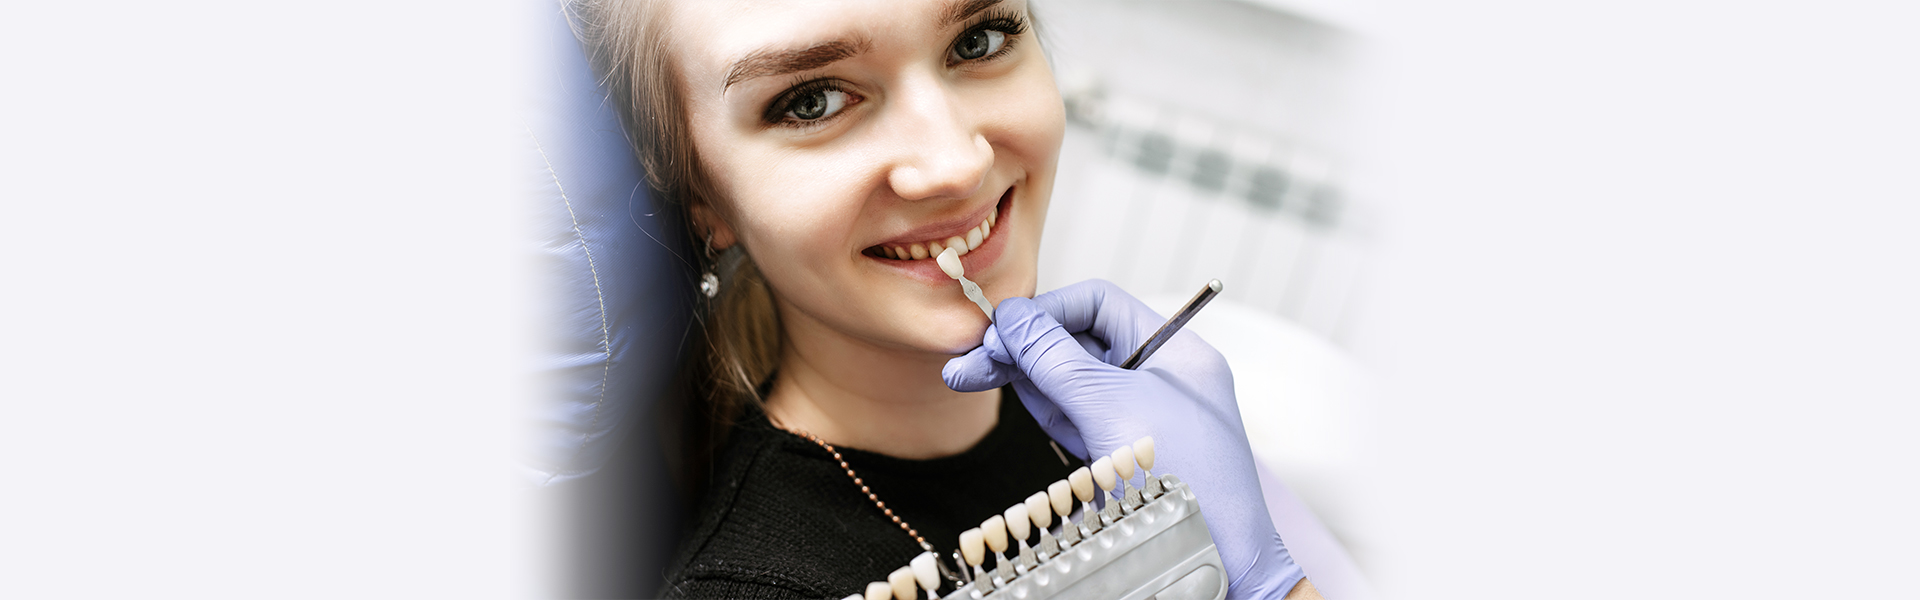 Dental Veneers: Process, Types, Cost, Benefits & Aftercare